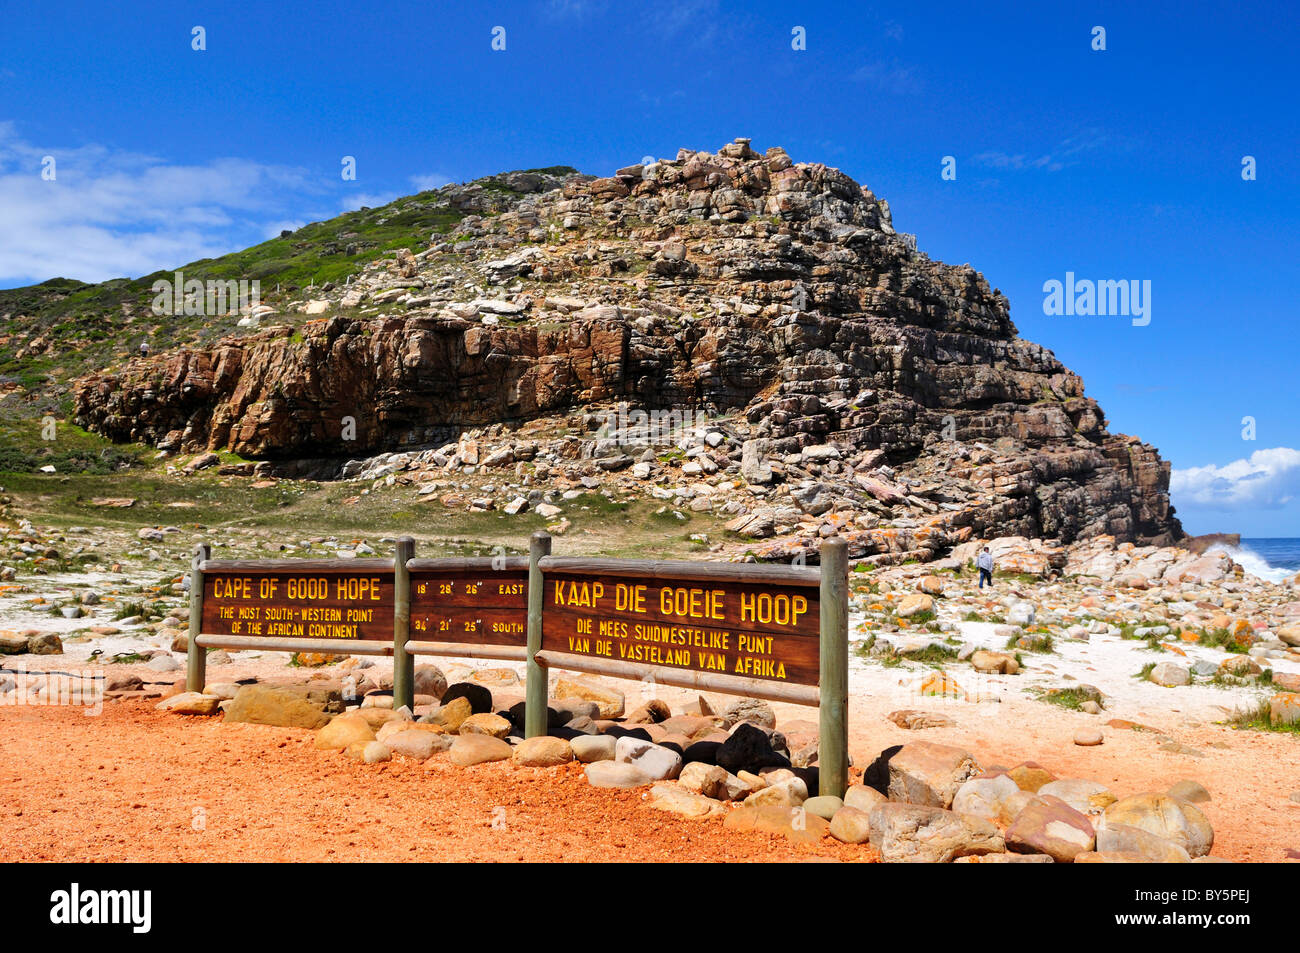 Cape of Good Hope. Table Mountain National Park, Cape Town, South Africa. Stock Photo